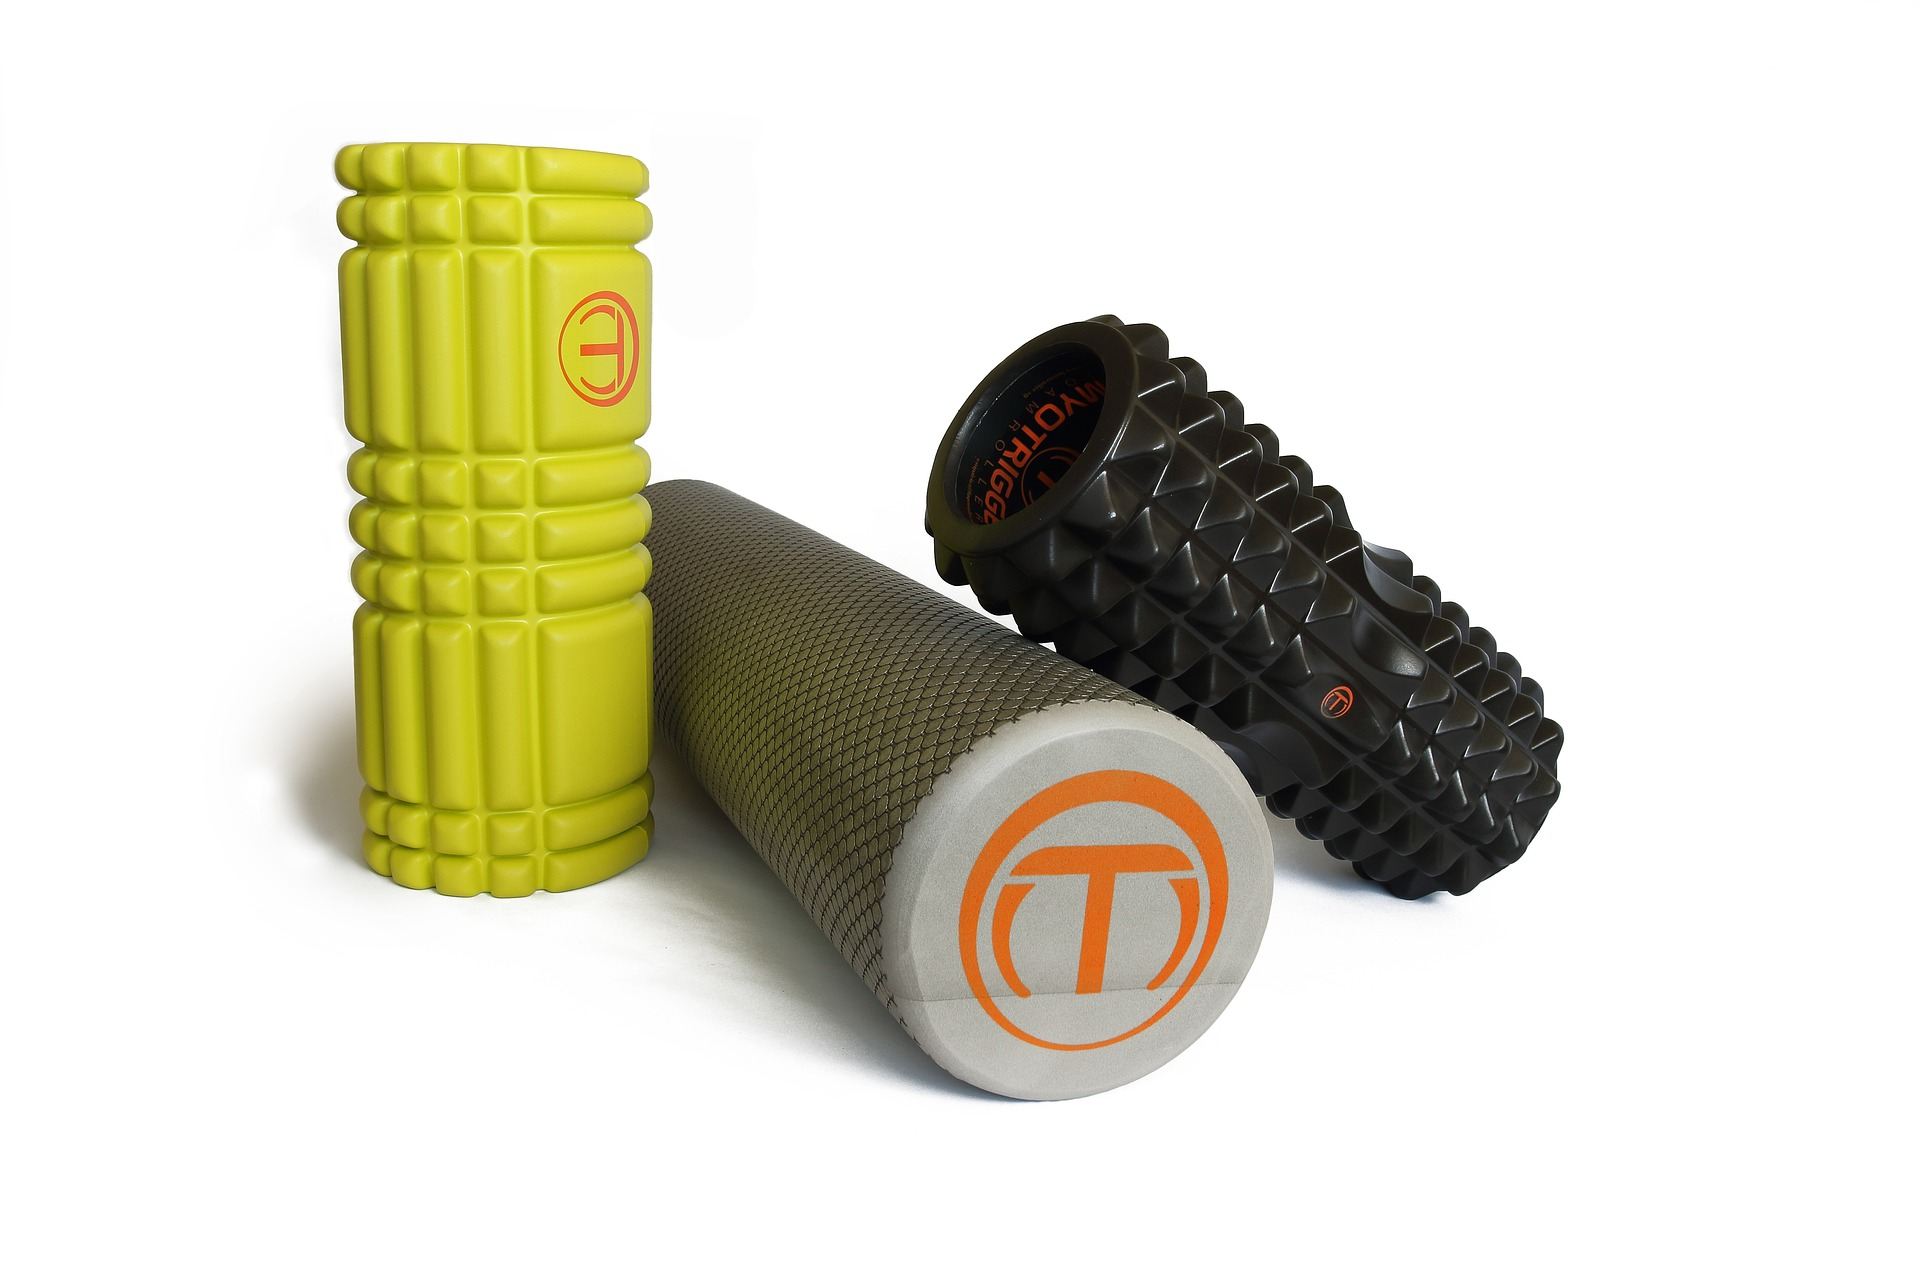 3 different foam rollers